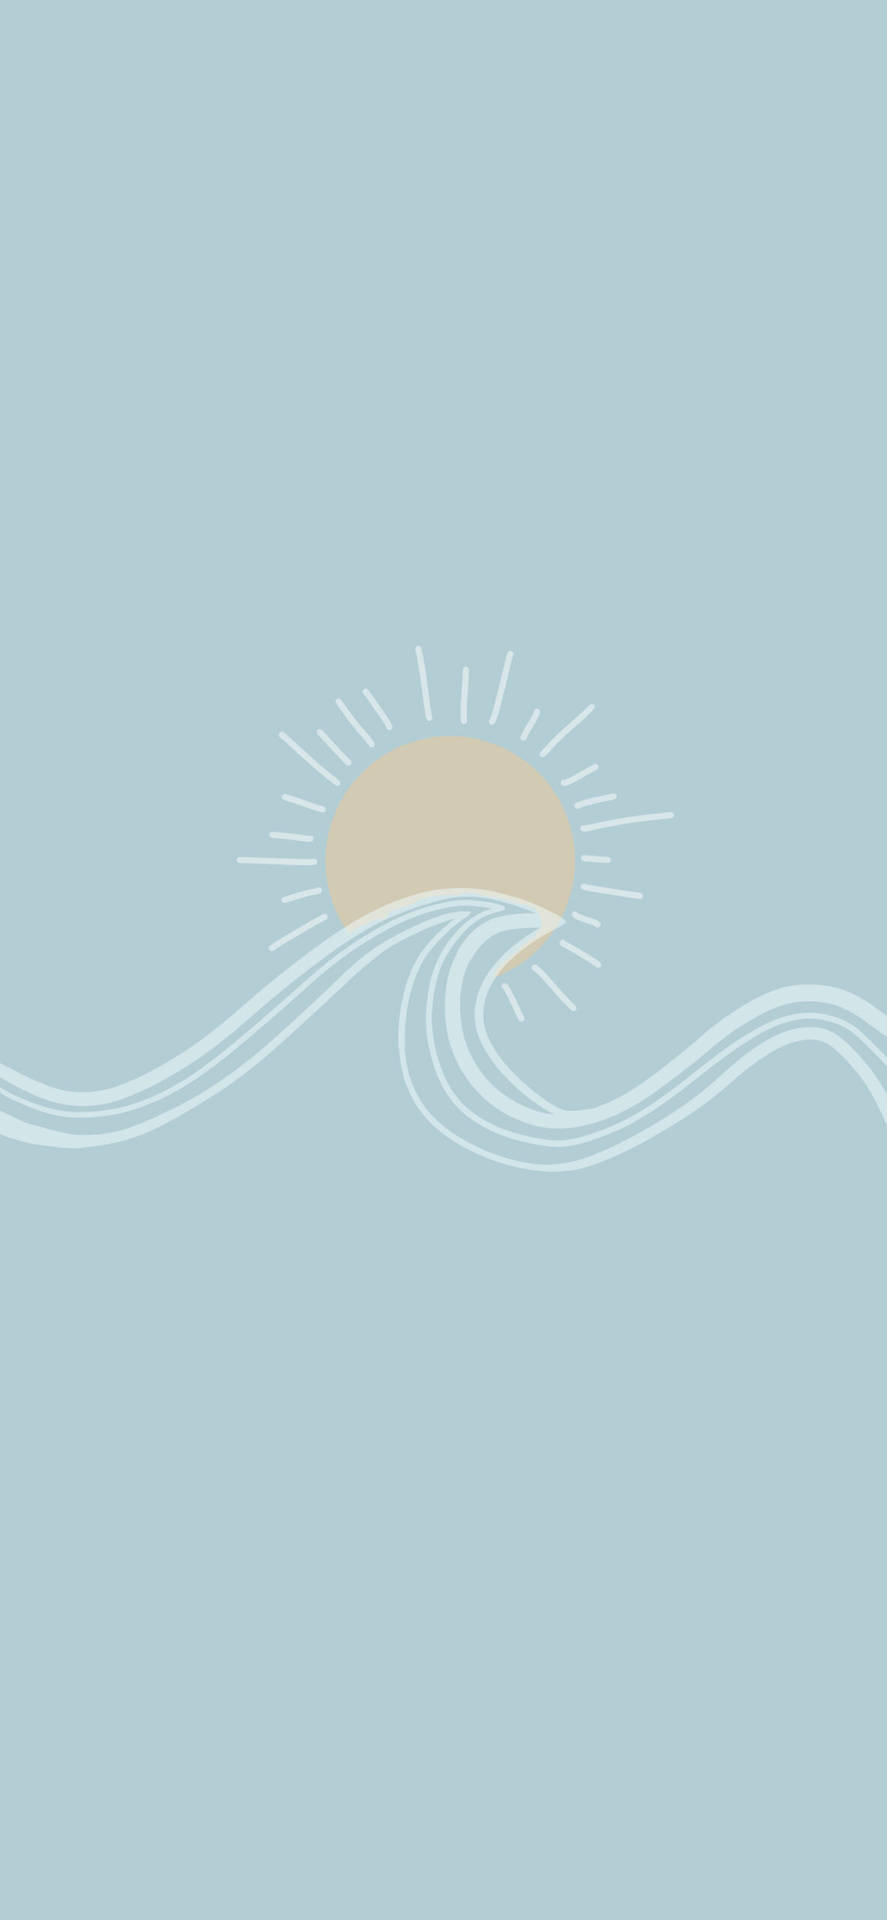 Aesthetic Blue Wave And Sun Illustration Wallpaper